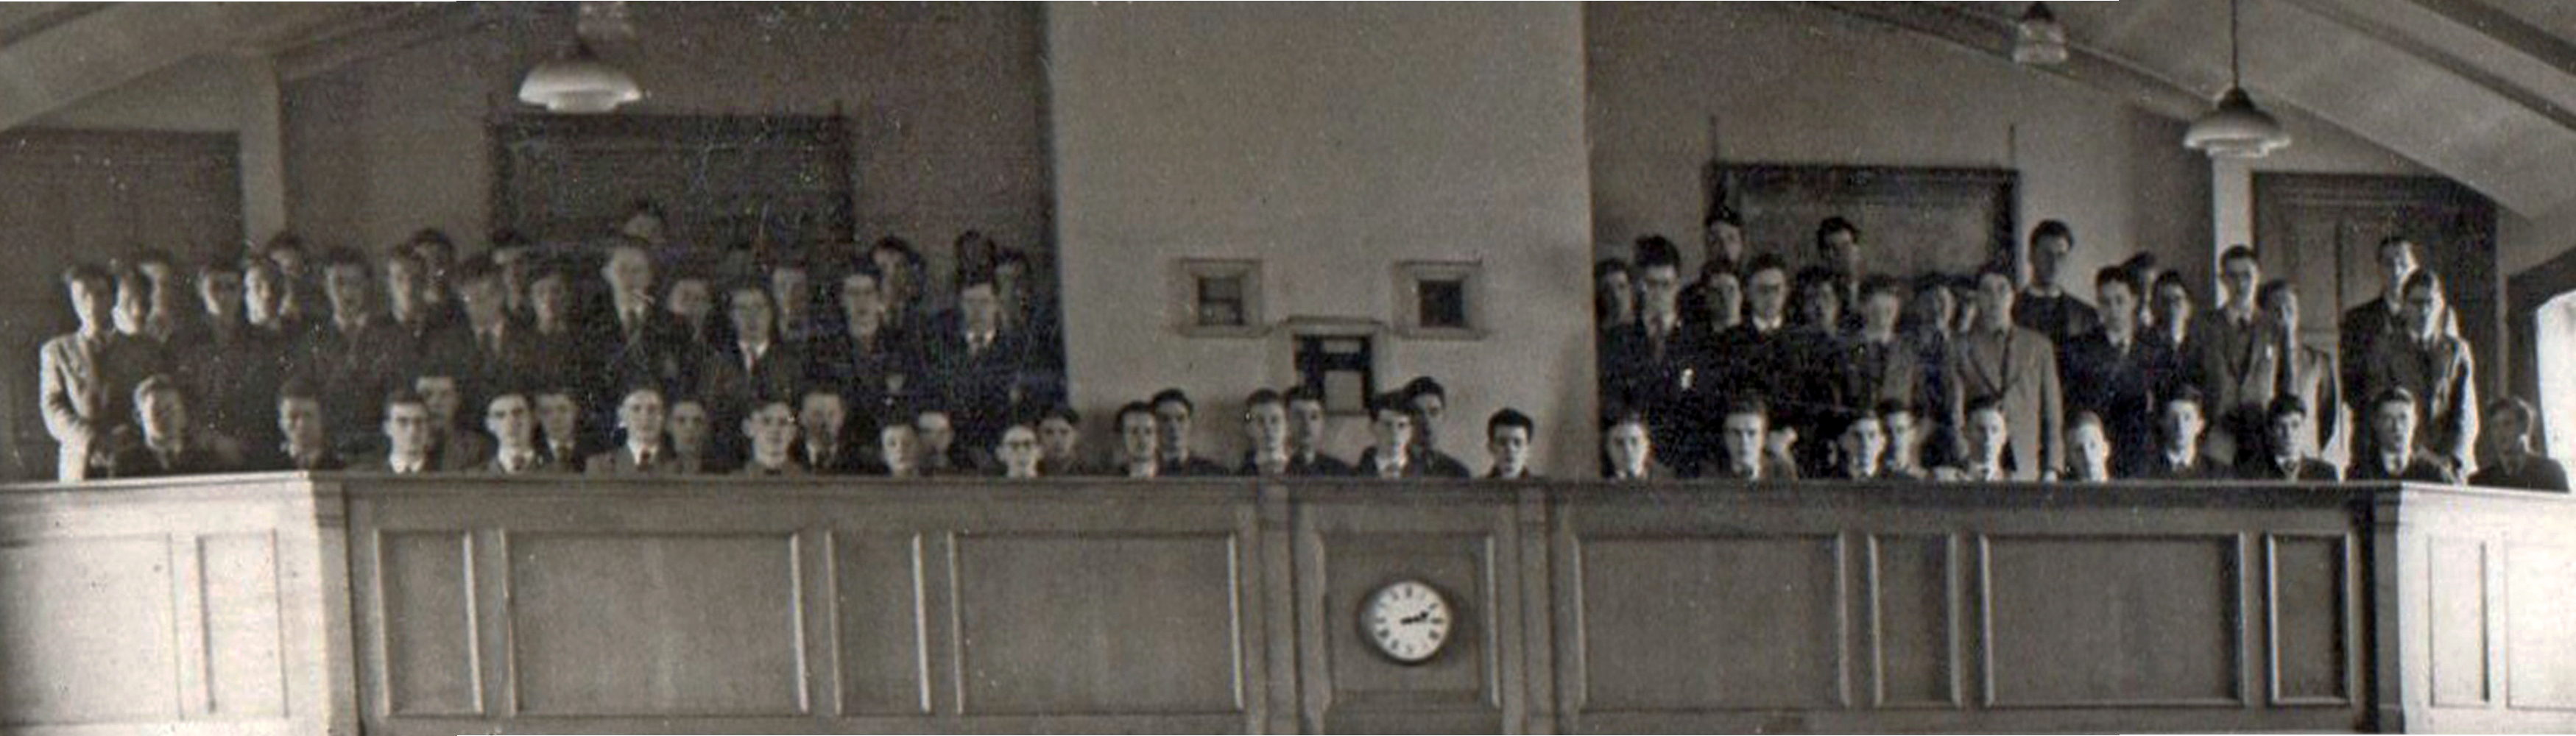 Sixth form on the balcony in 1956